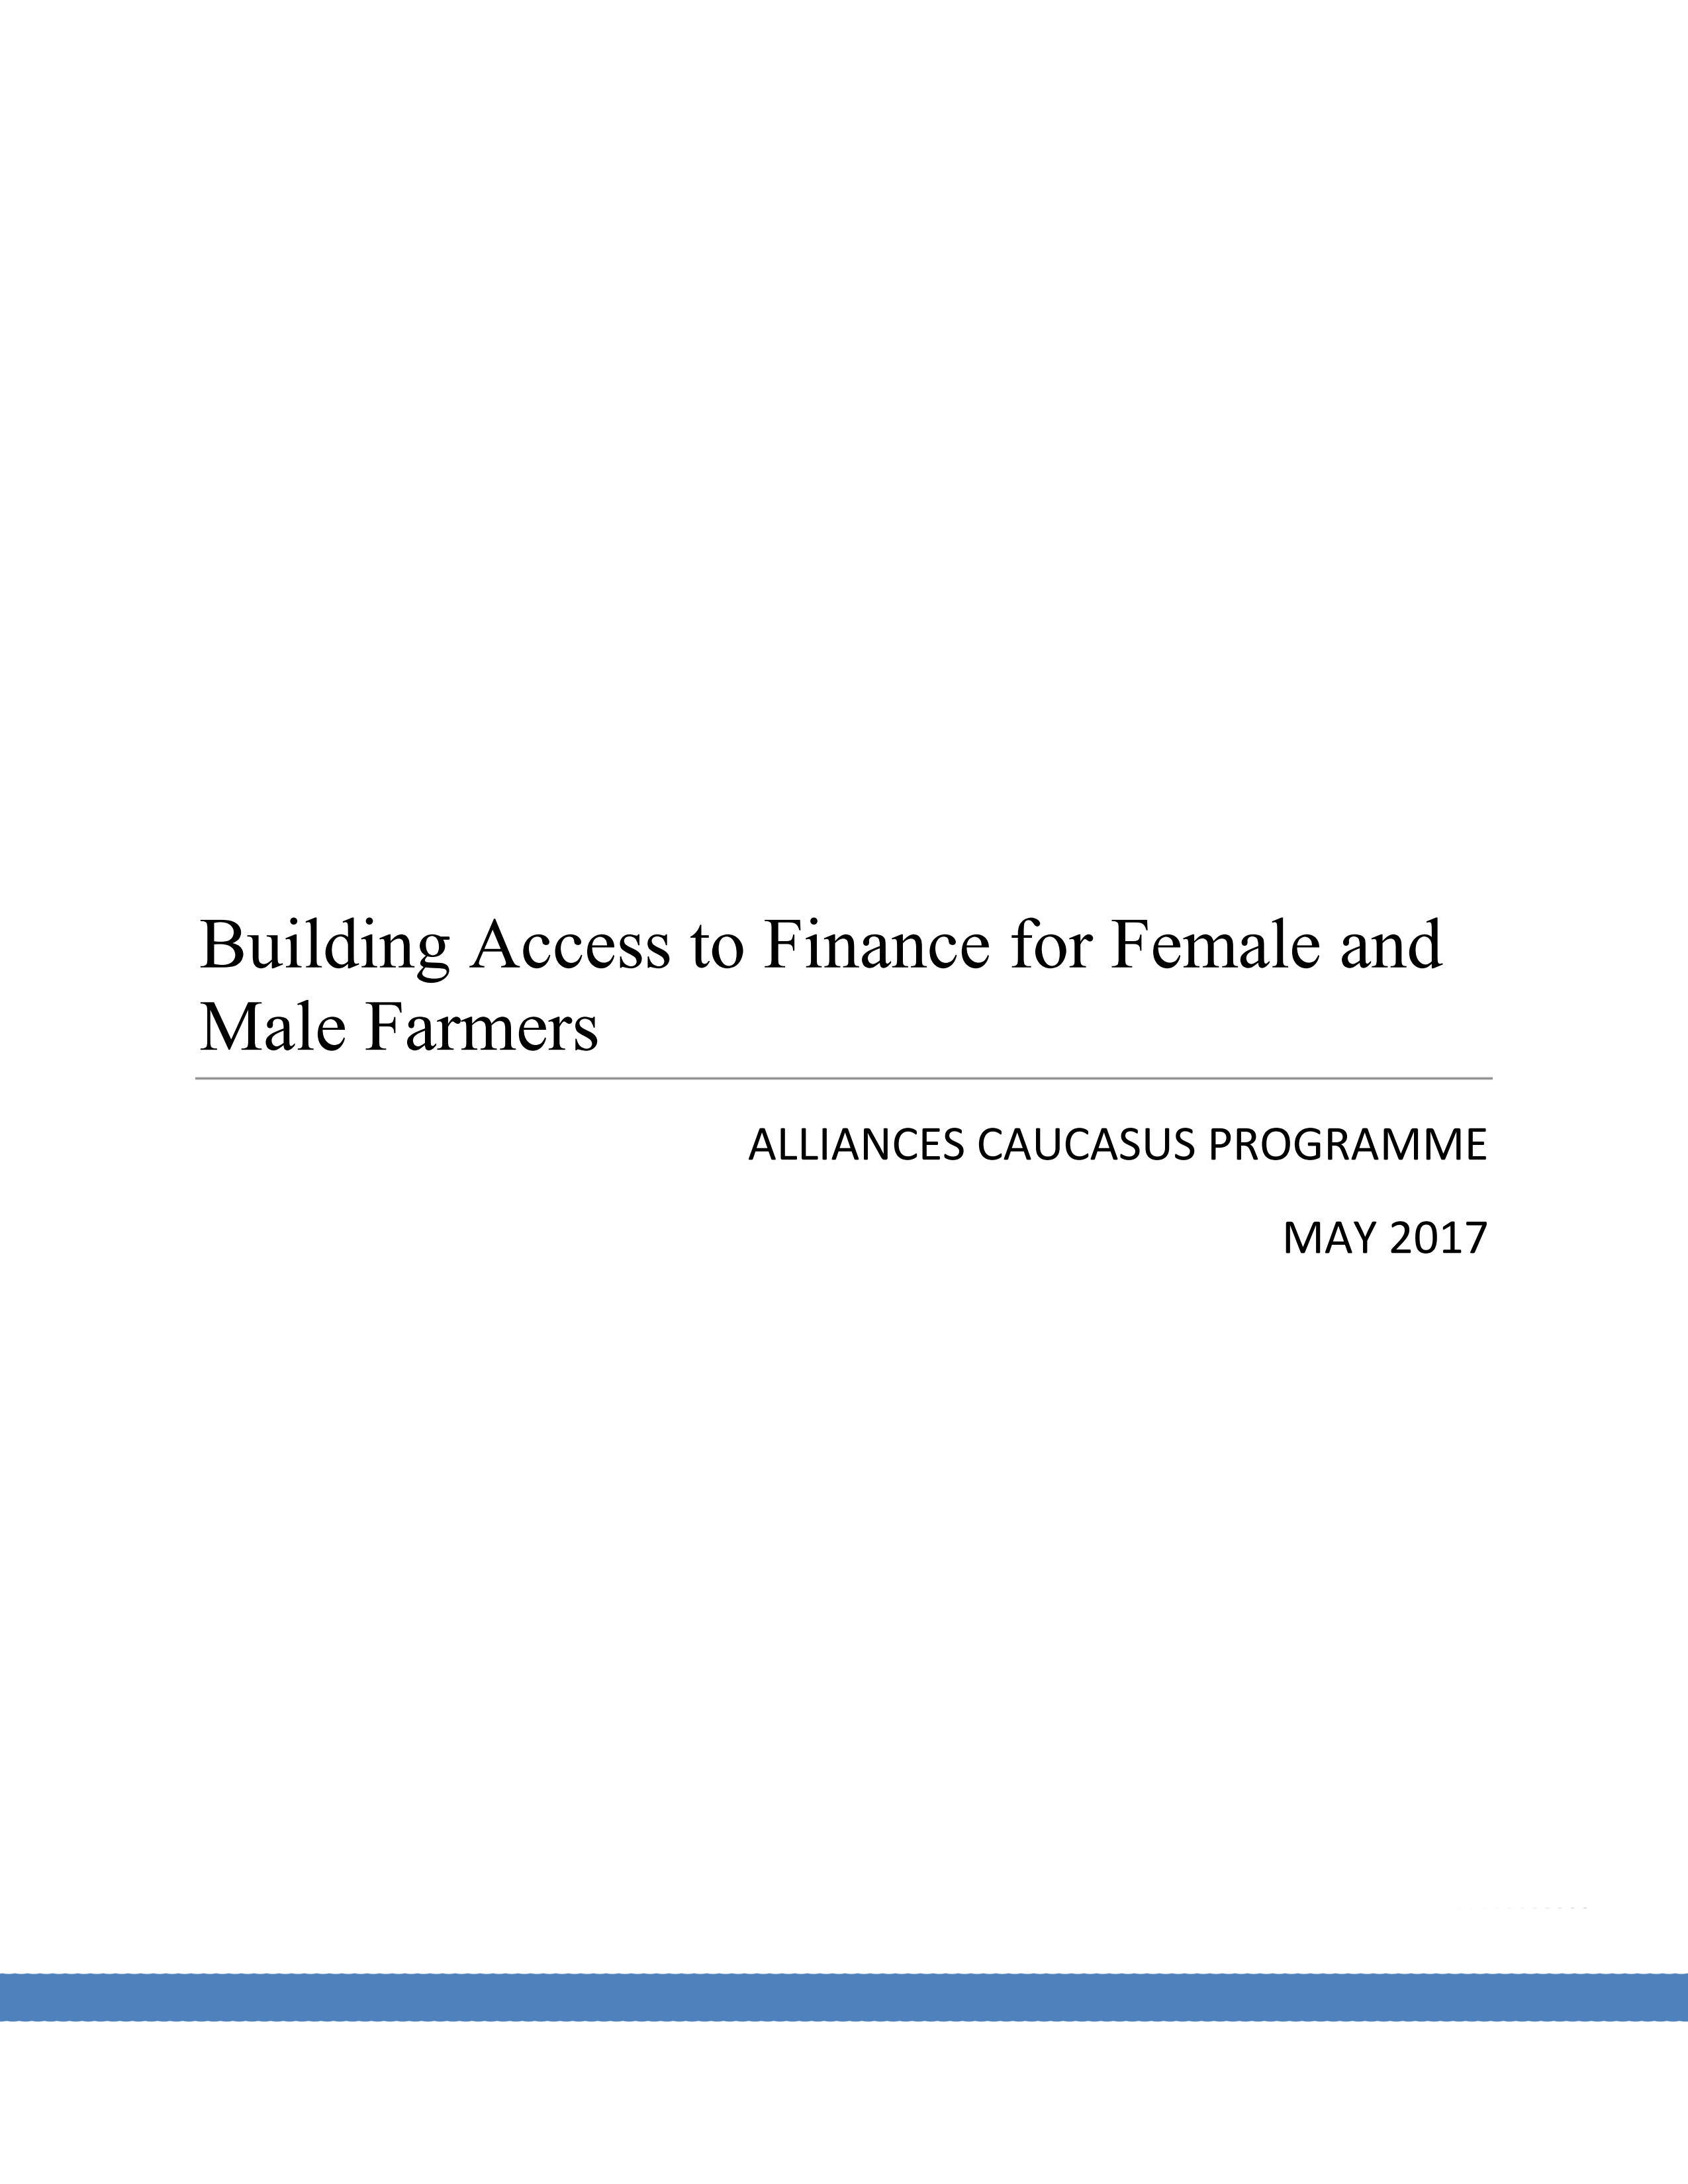 Access to Finance June 19 2017